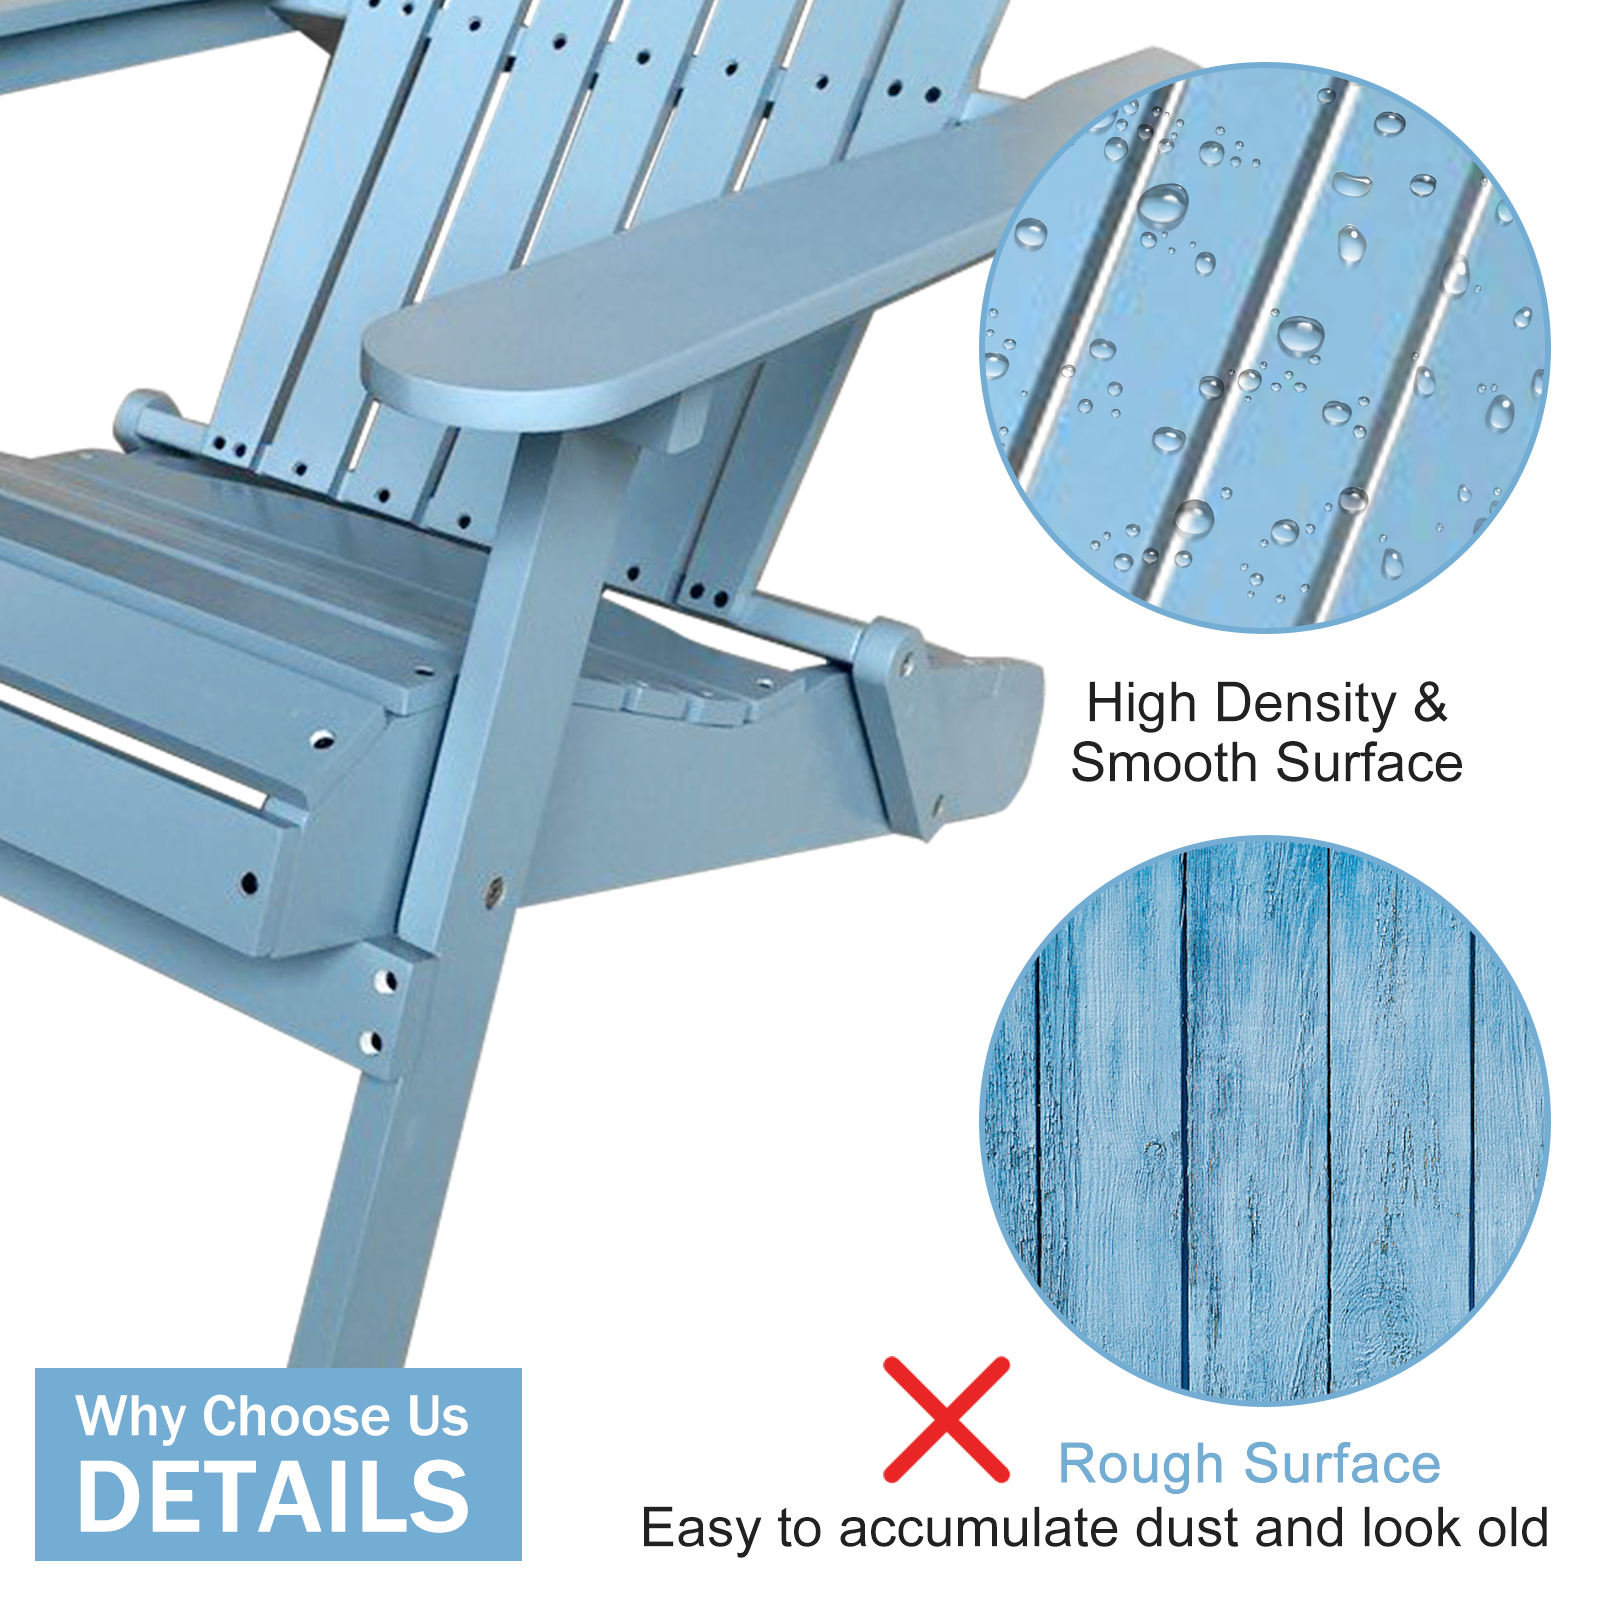 Adirondack Chair Outdoor Folding Wooden Adirondack Lounger Chair Patio Chair Lawn Chair for Adults, Turquoise, Blue - image 5 of 7